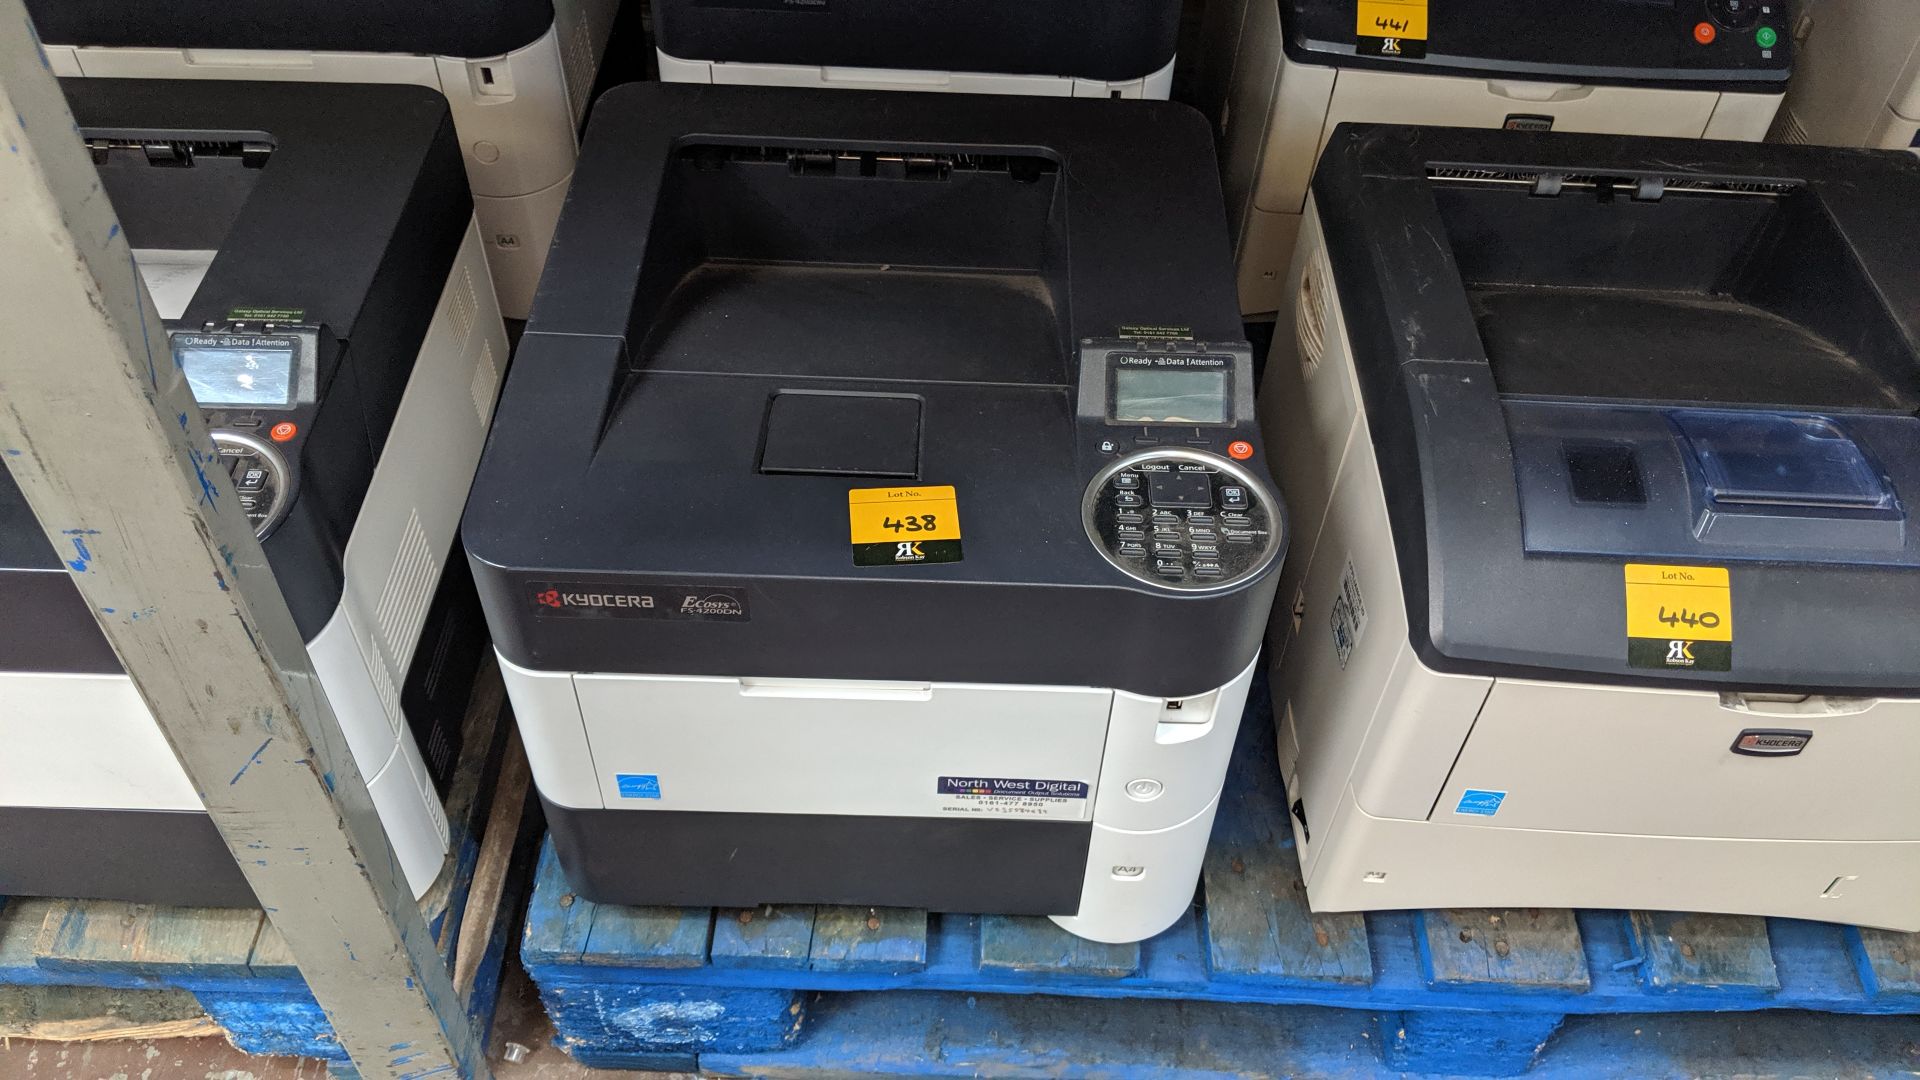 Kyocera A4 desktop laser printer model FS-4200DN. This is one of a large number of lots being sold